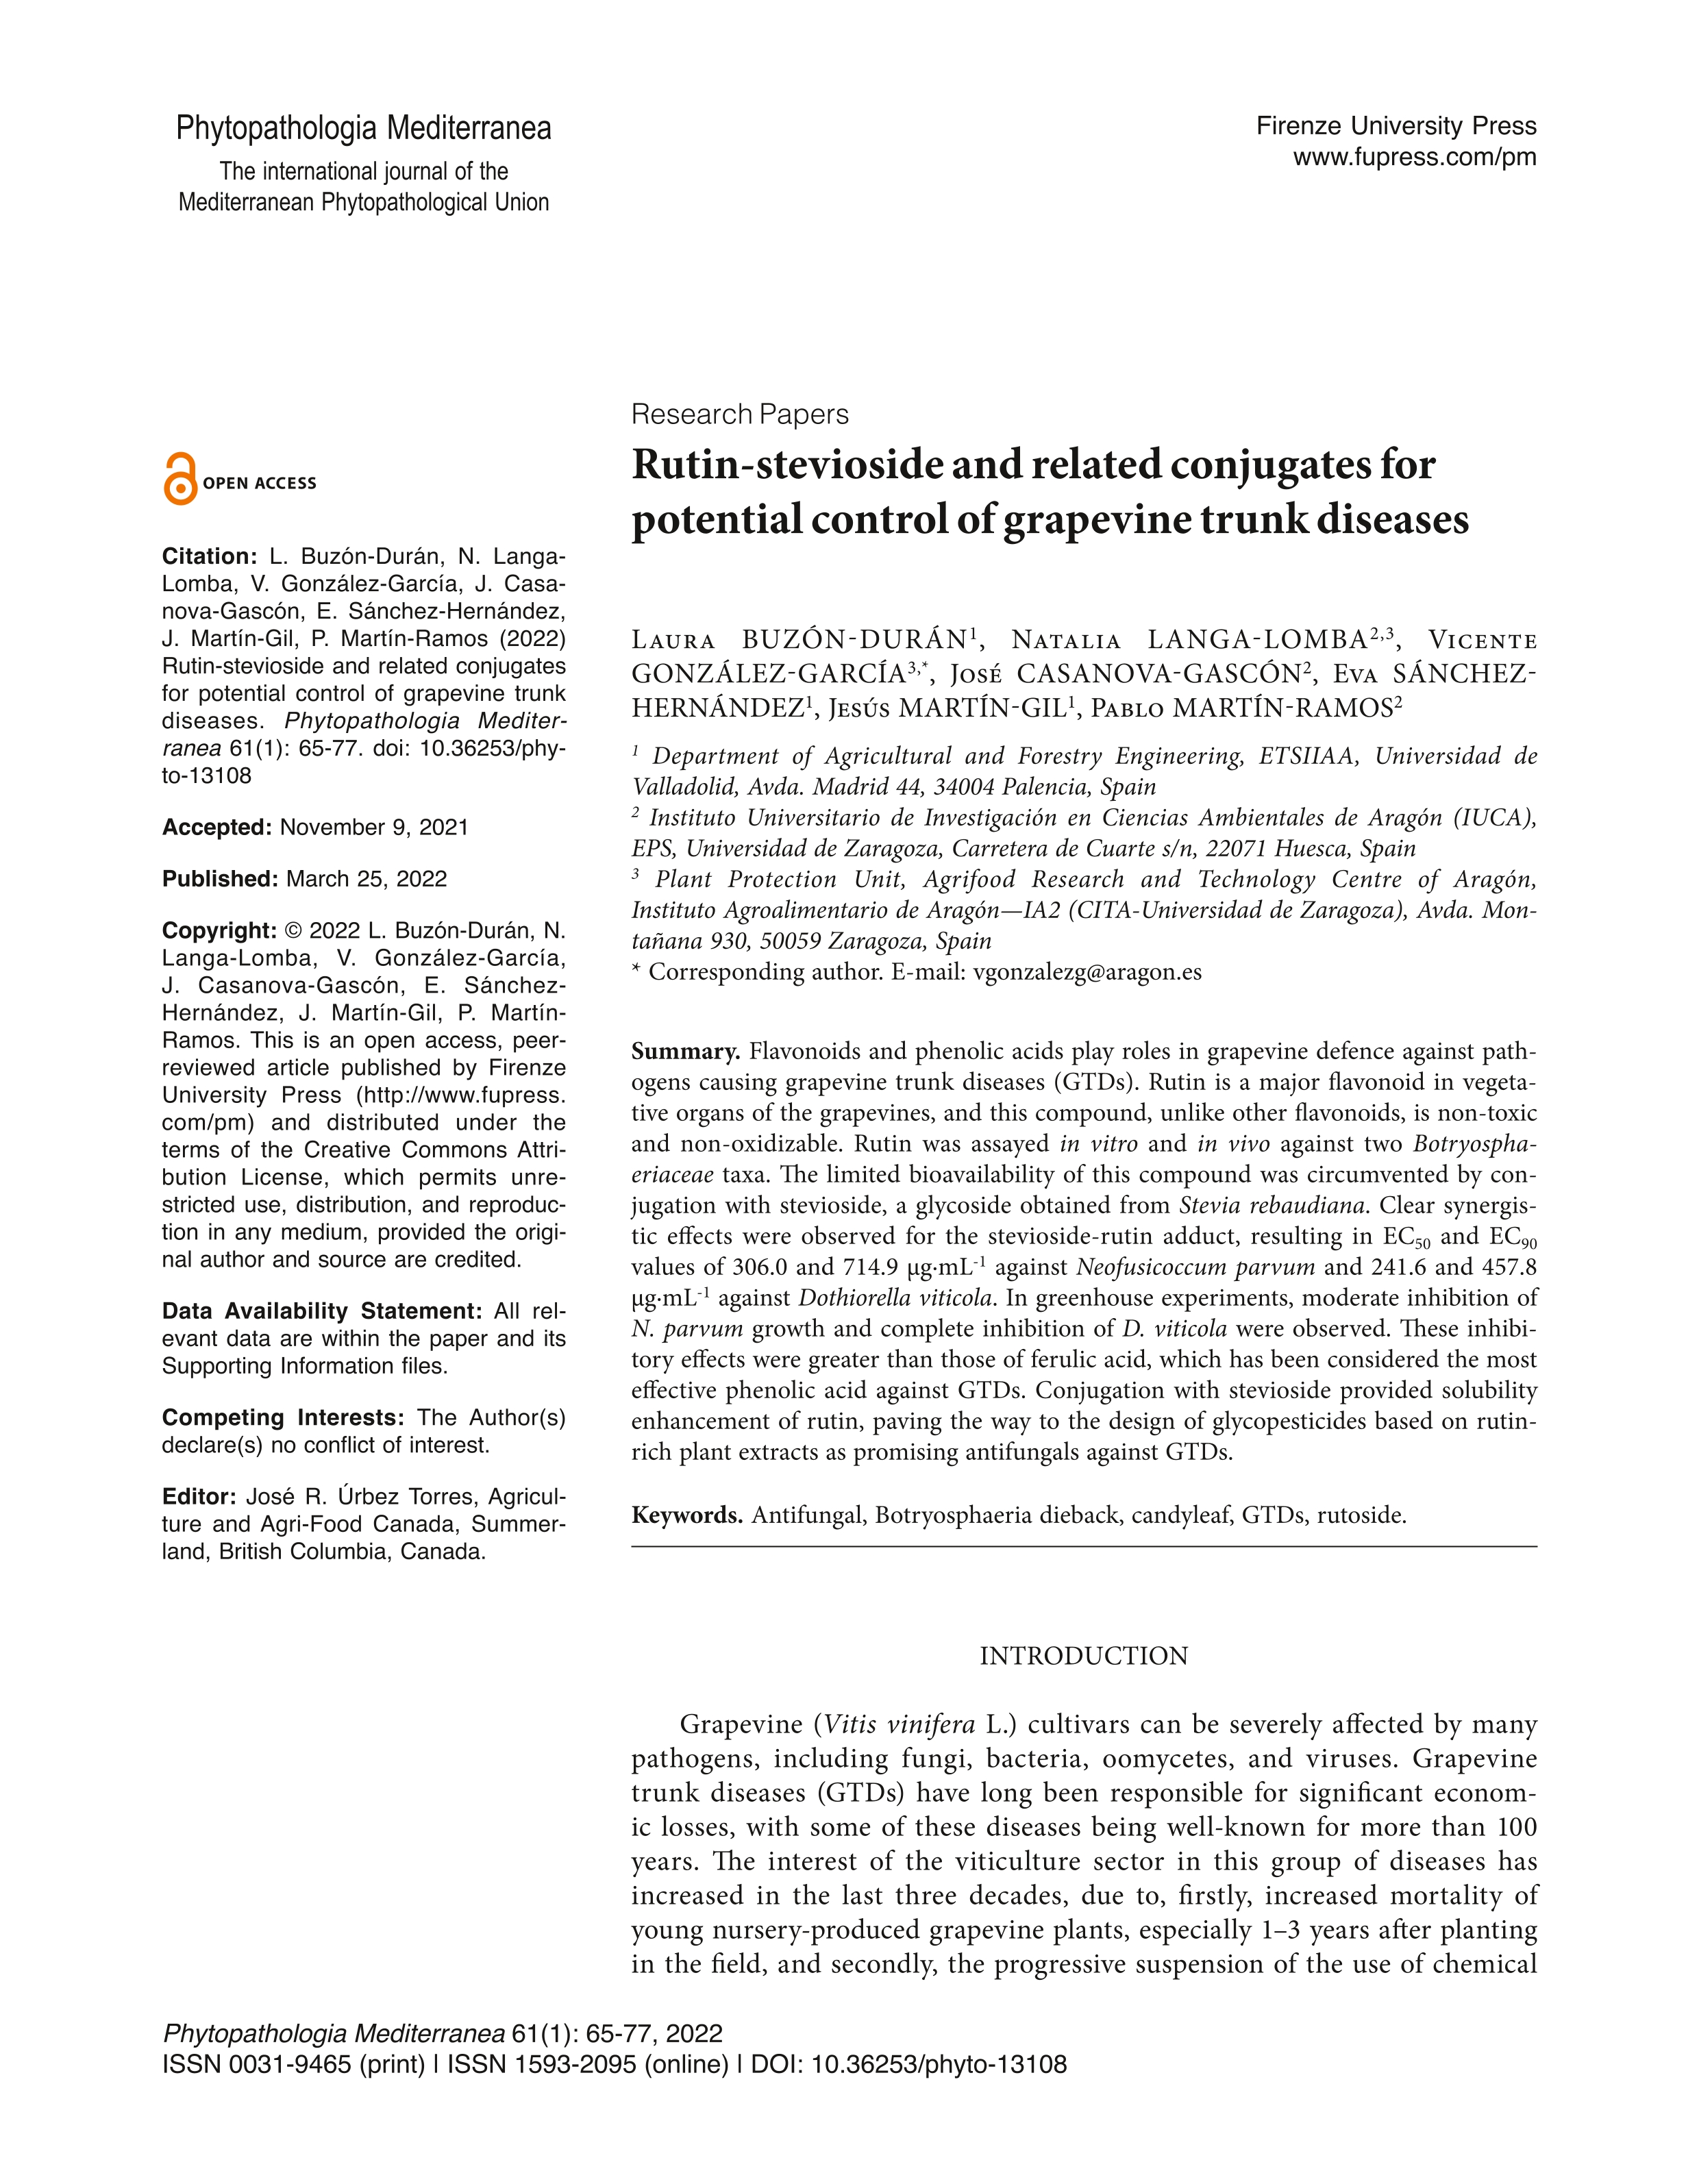 Rutin-stevioside and related conjugates for potential control of grapevine trunk diseases